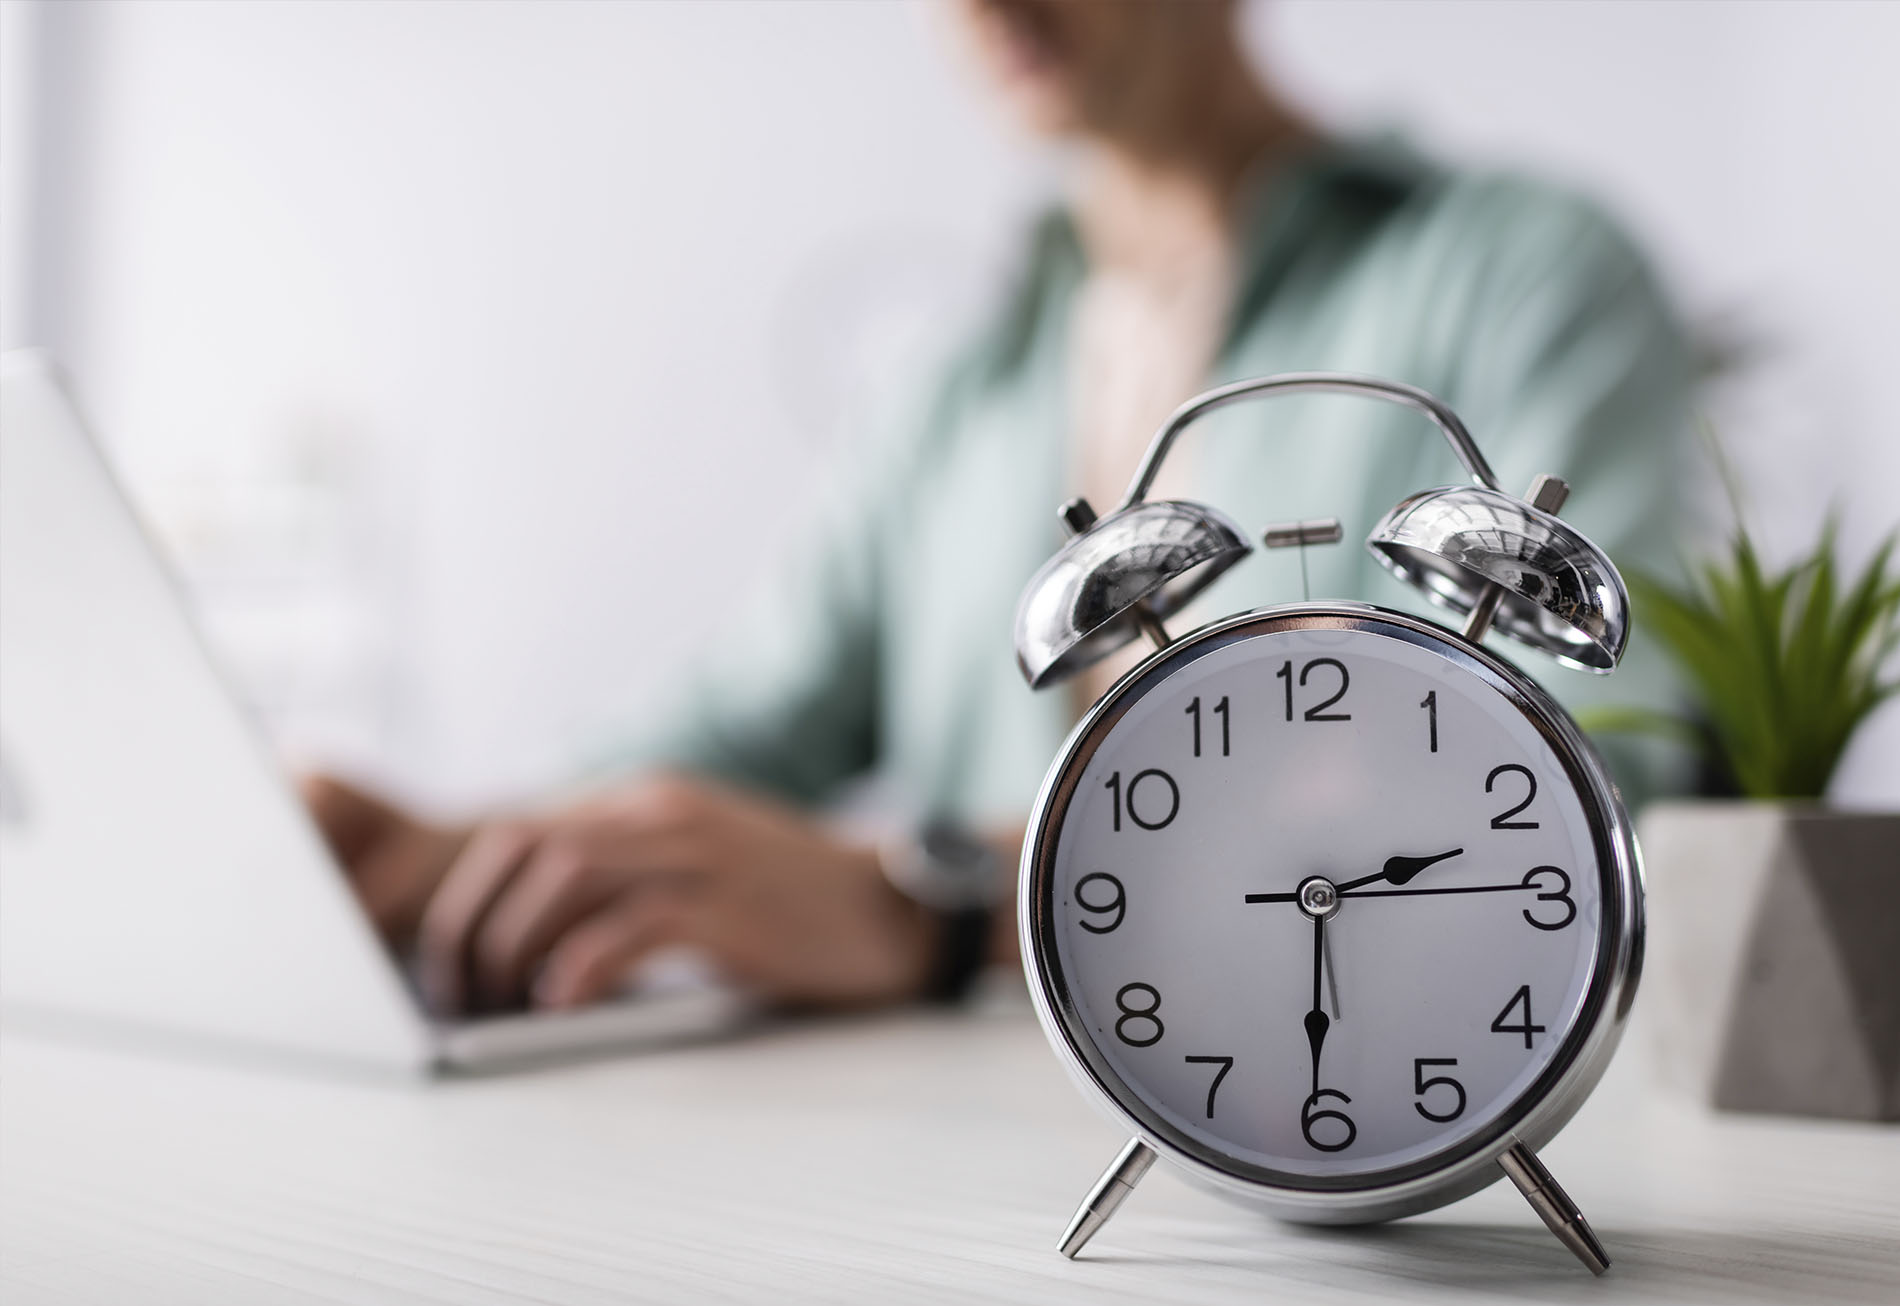 Time Management - The Consequences Of Poor Time Management